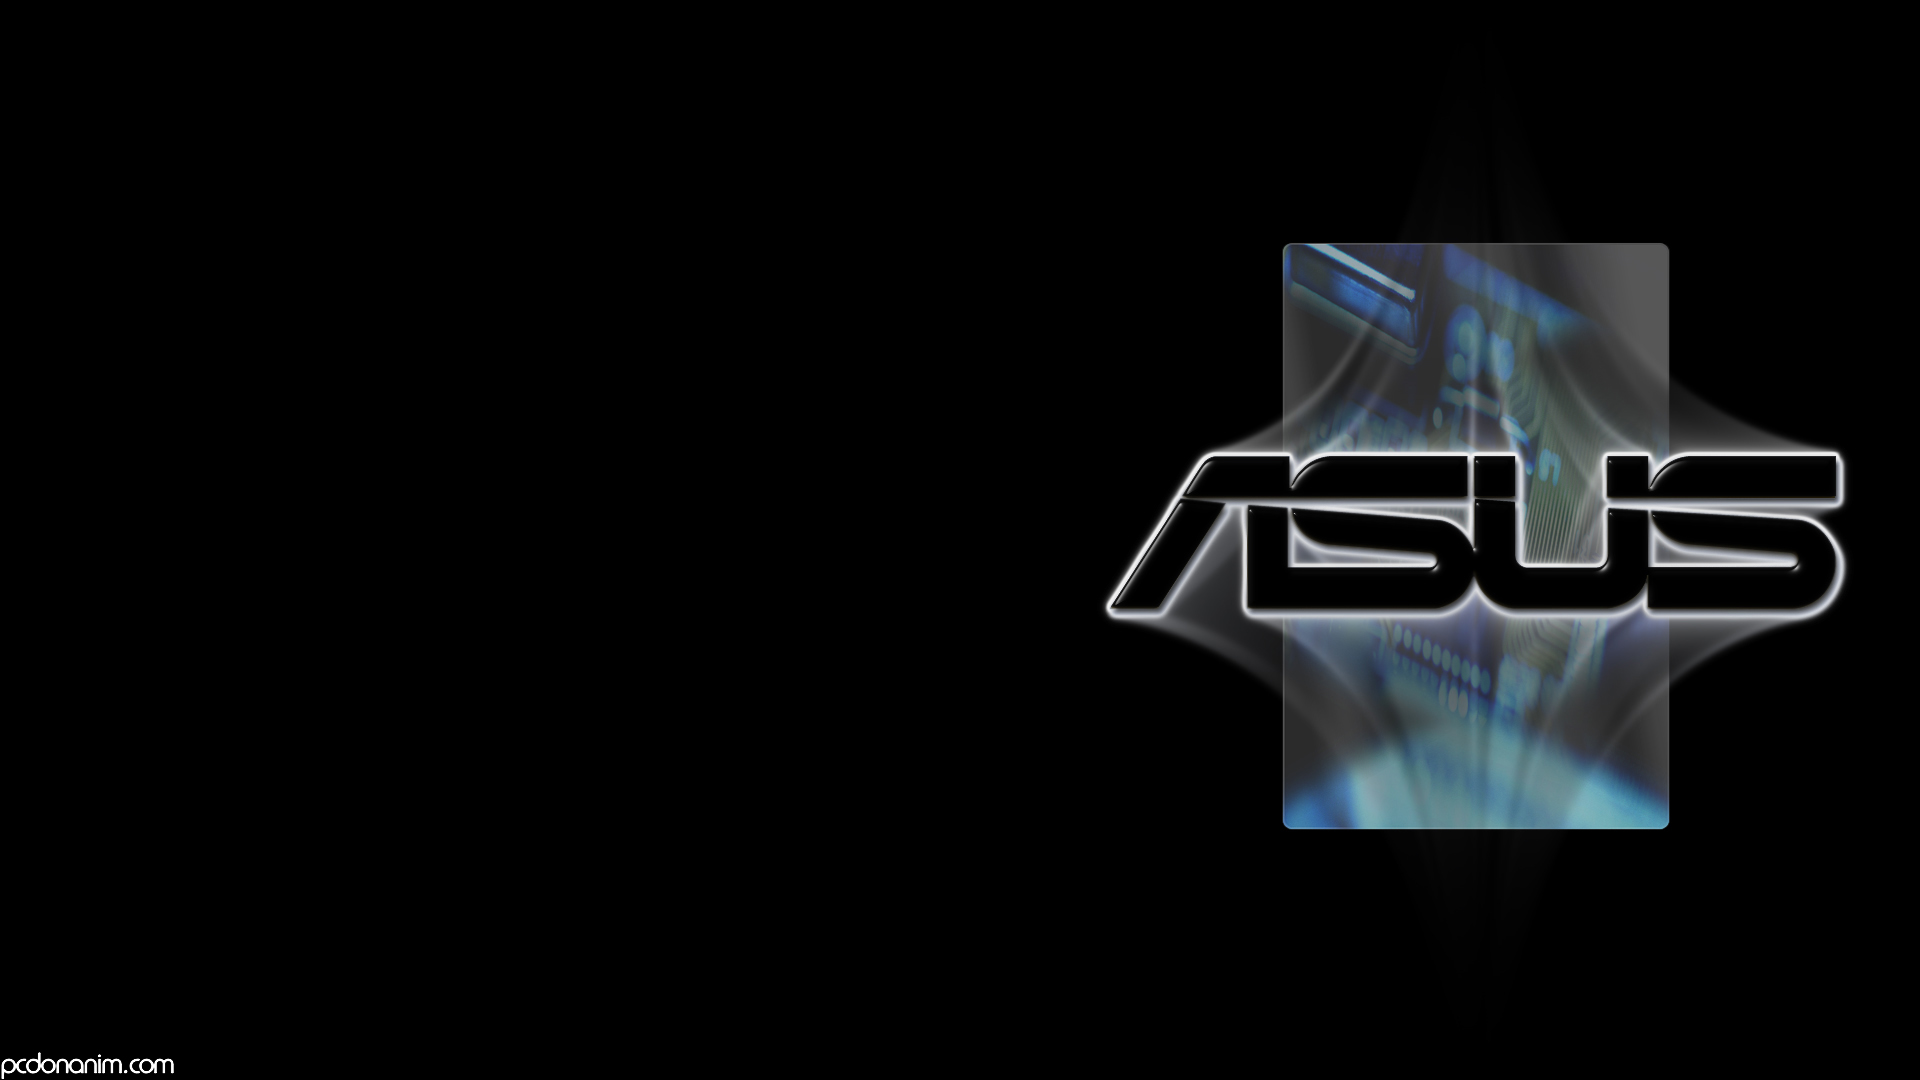 Asus Wallpaper 2 Widejpg Picture 1920x1080